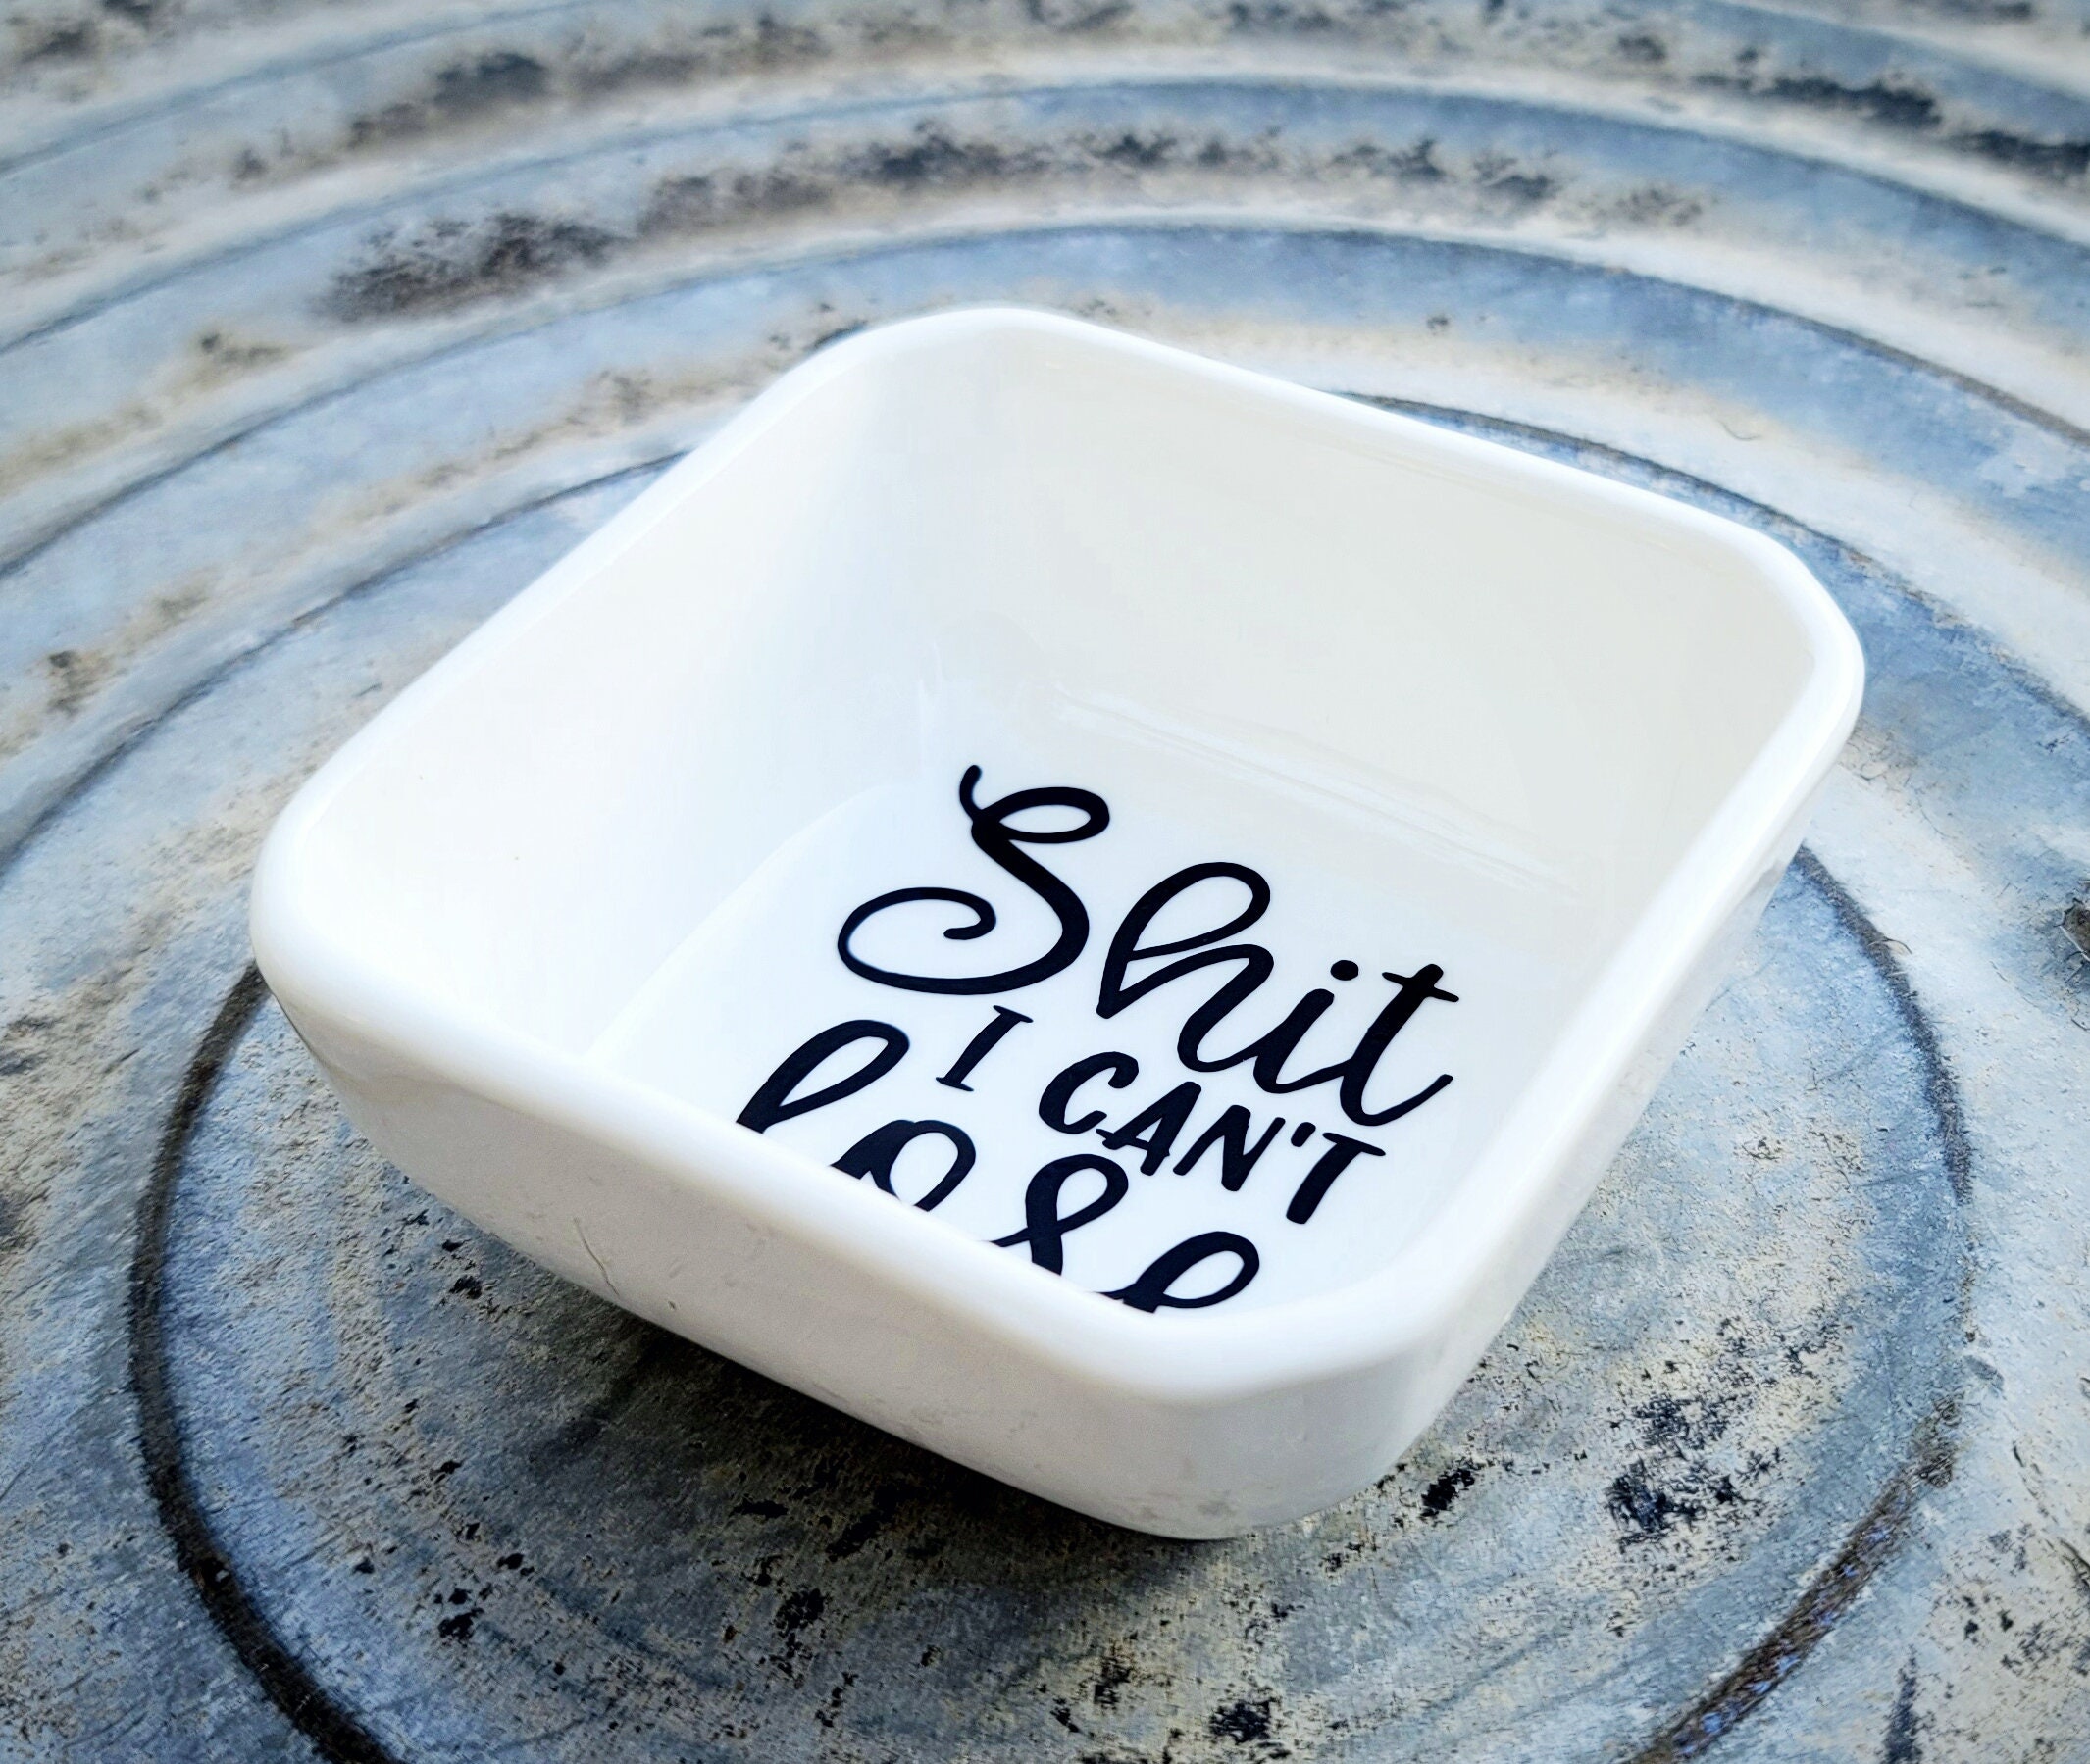 Personalized Ring Dish Car Keys Holder Ring Holder Bride to Be Ring Tray Jewelry Dish Shit I Can\u2019t Lose Ring holder